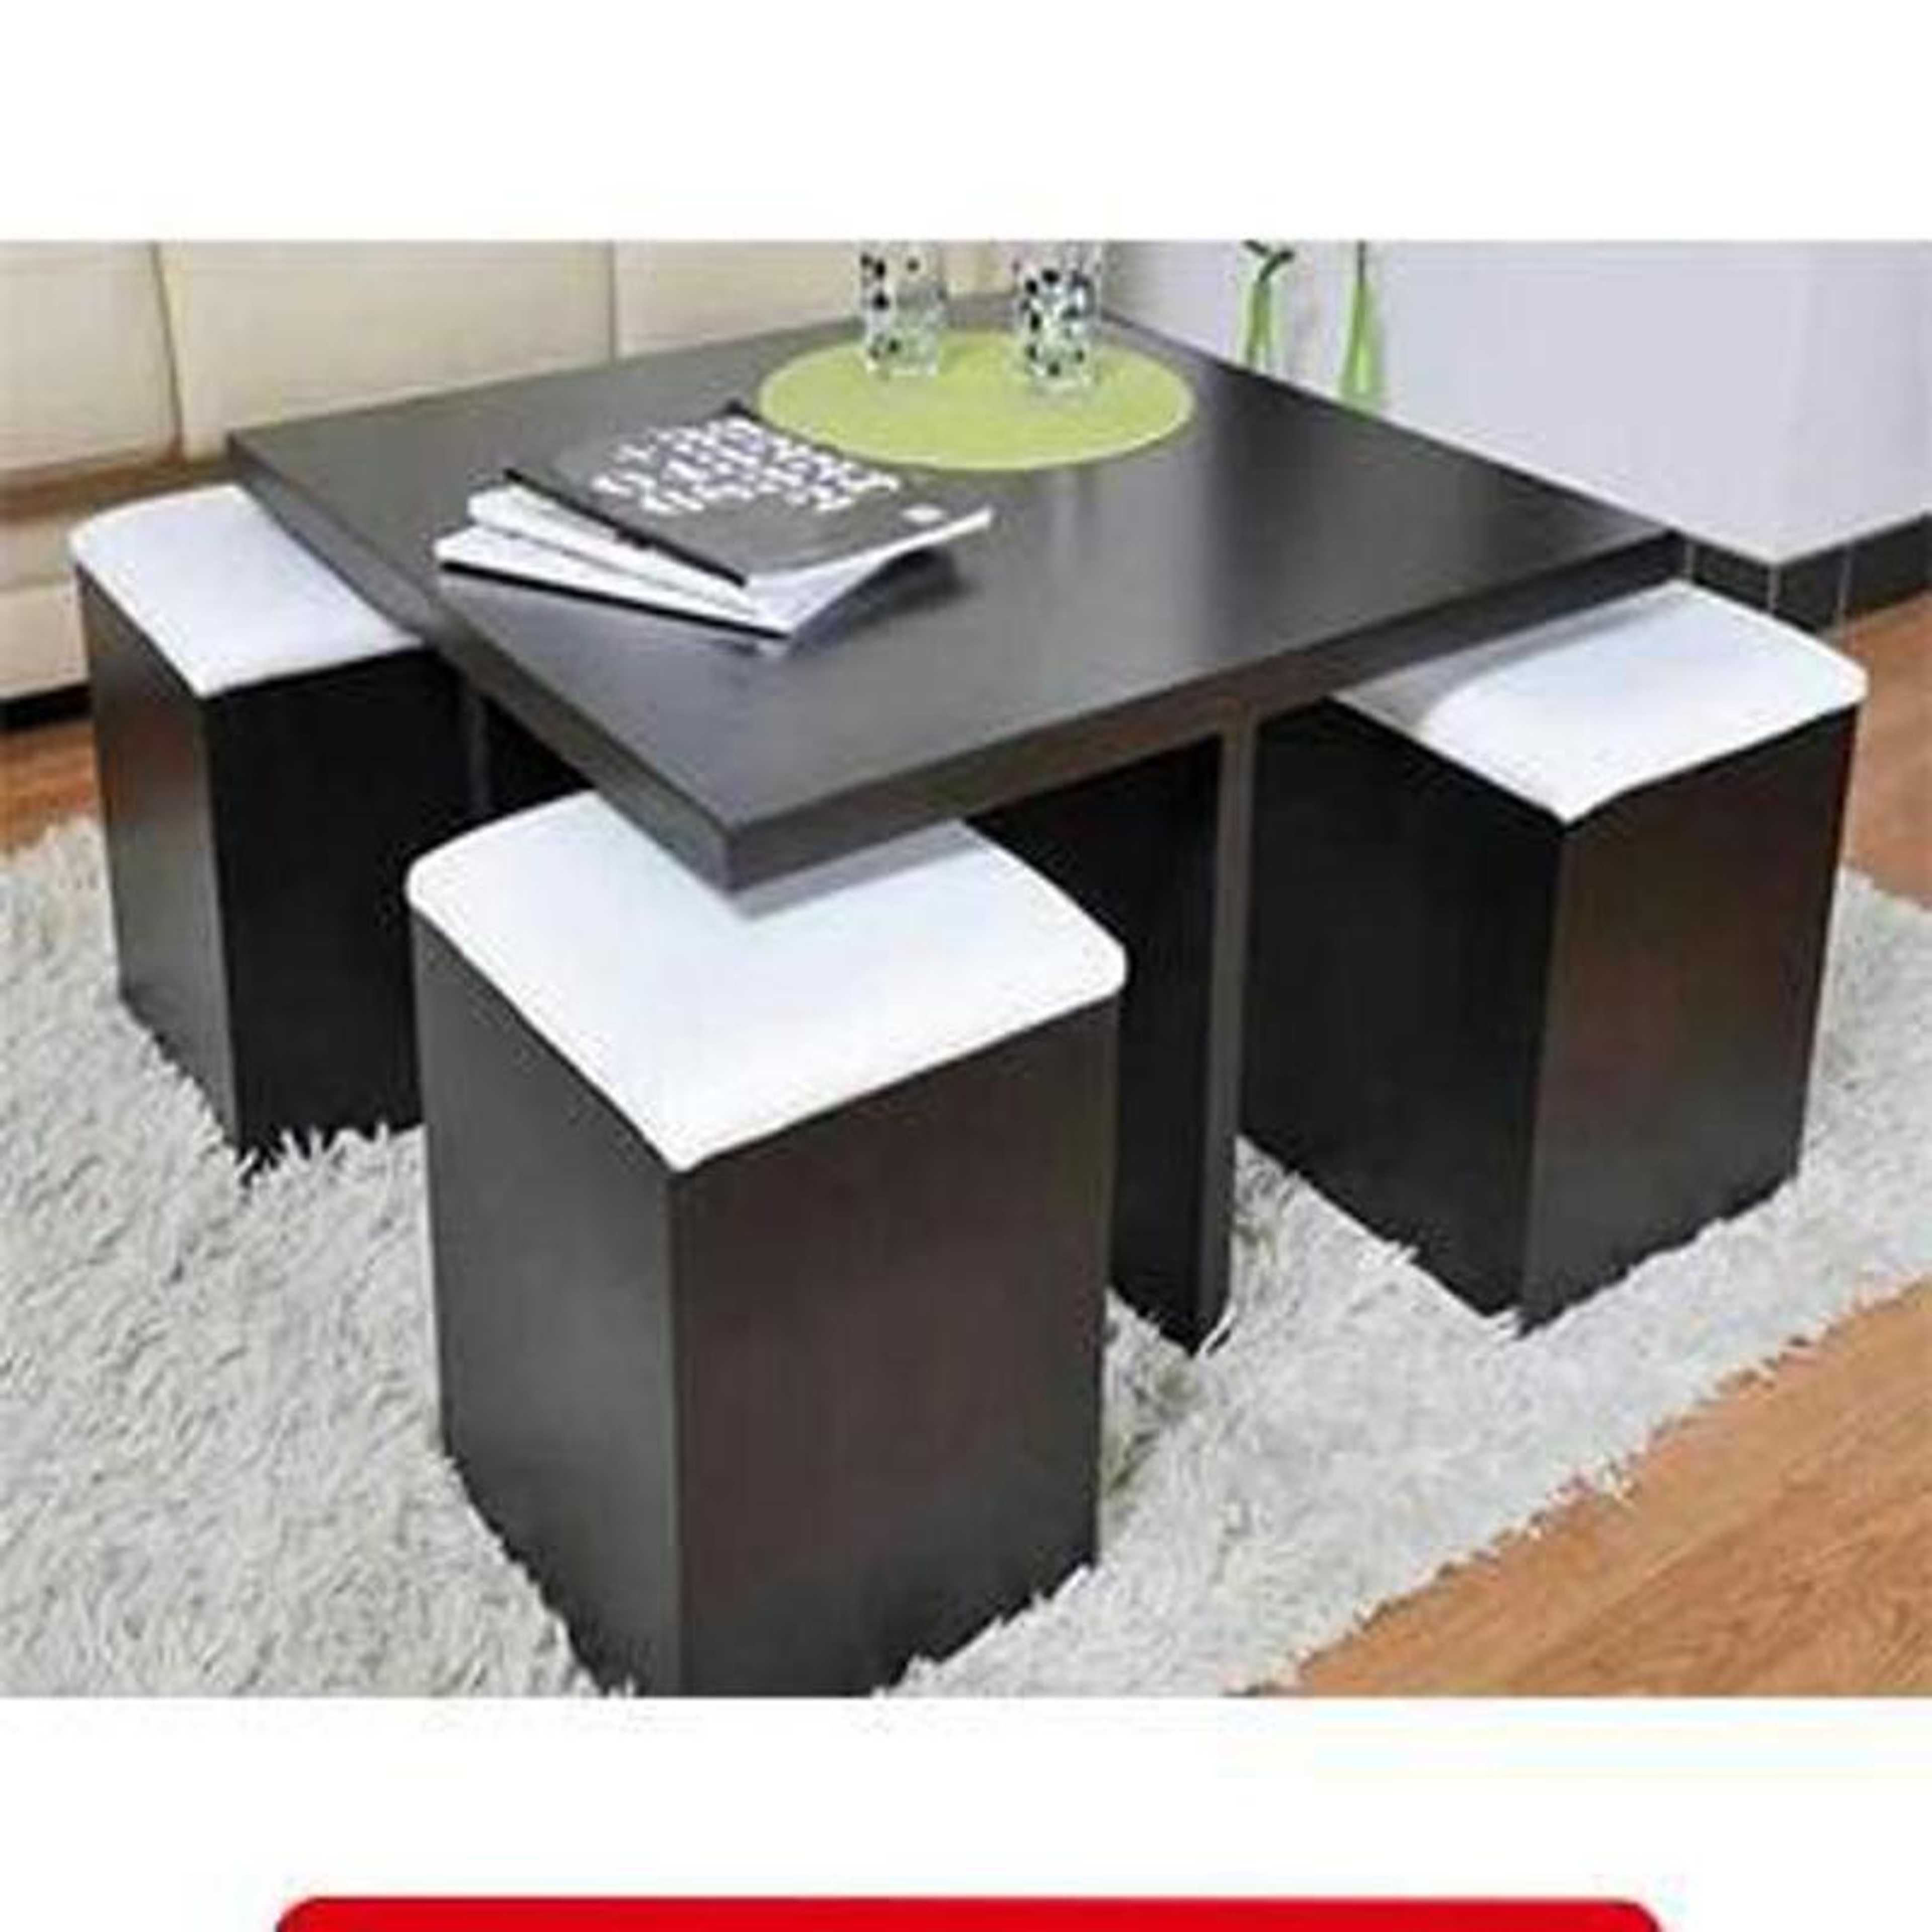 Dream-dining table or center table with 4 seats-TWDT12-Black